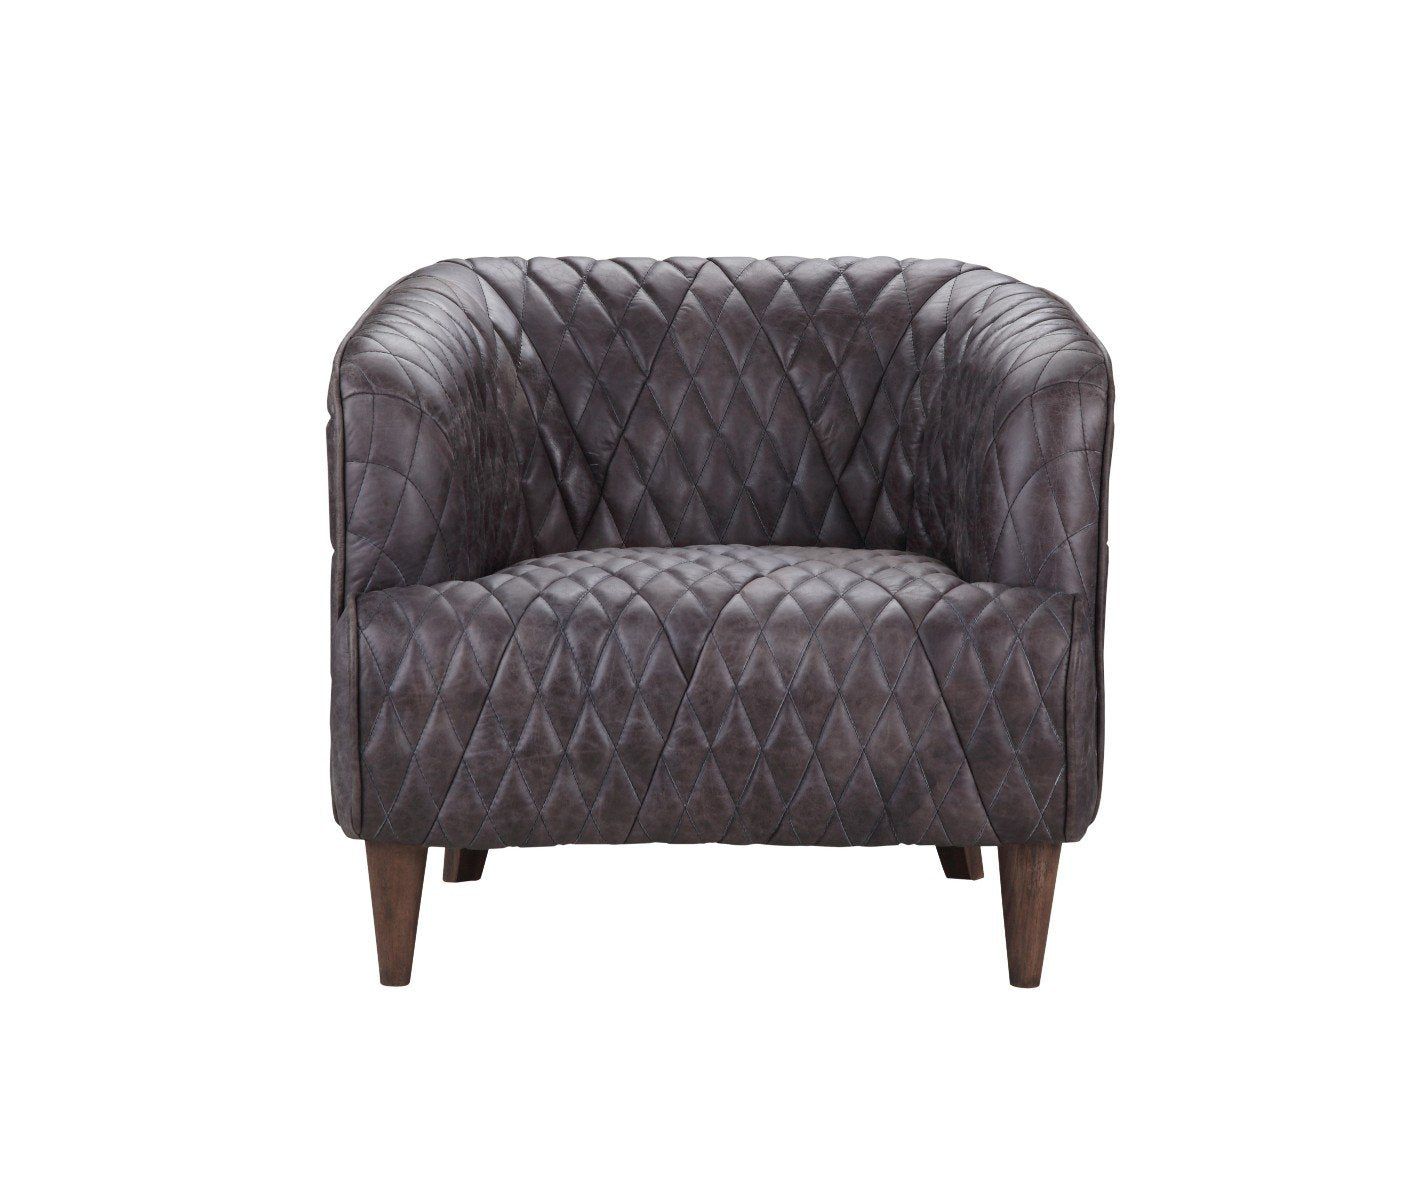 Magdelan Tufted Leather Arm Chair Antique Ebony